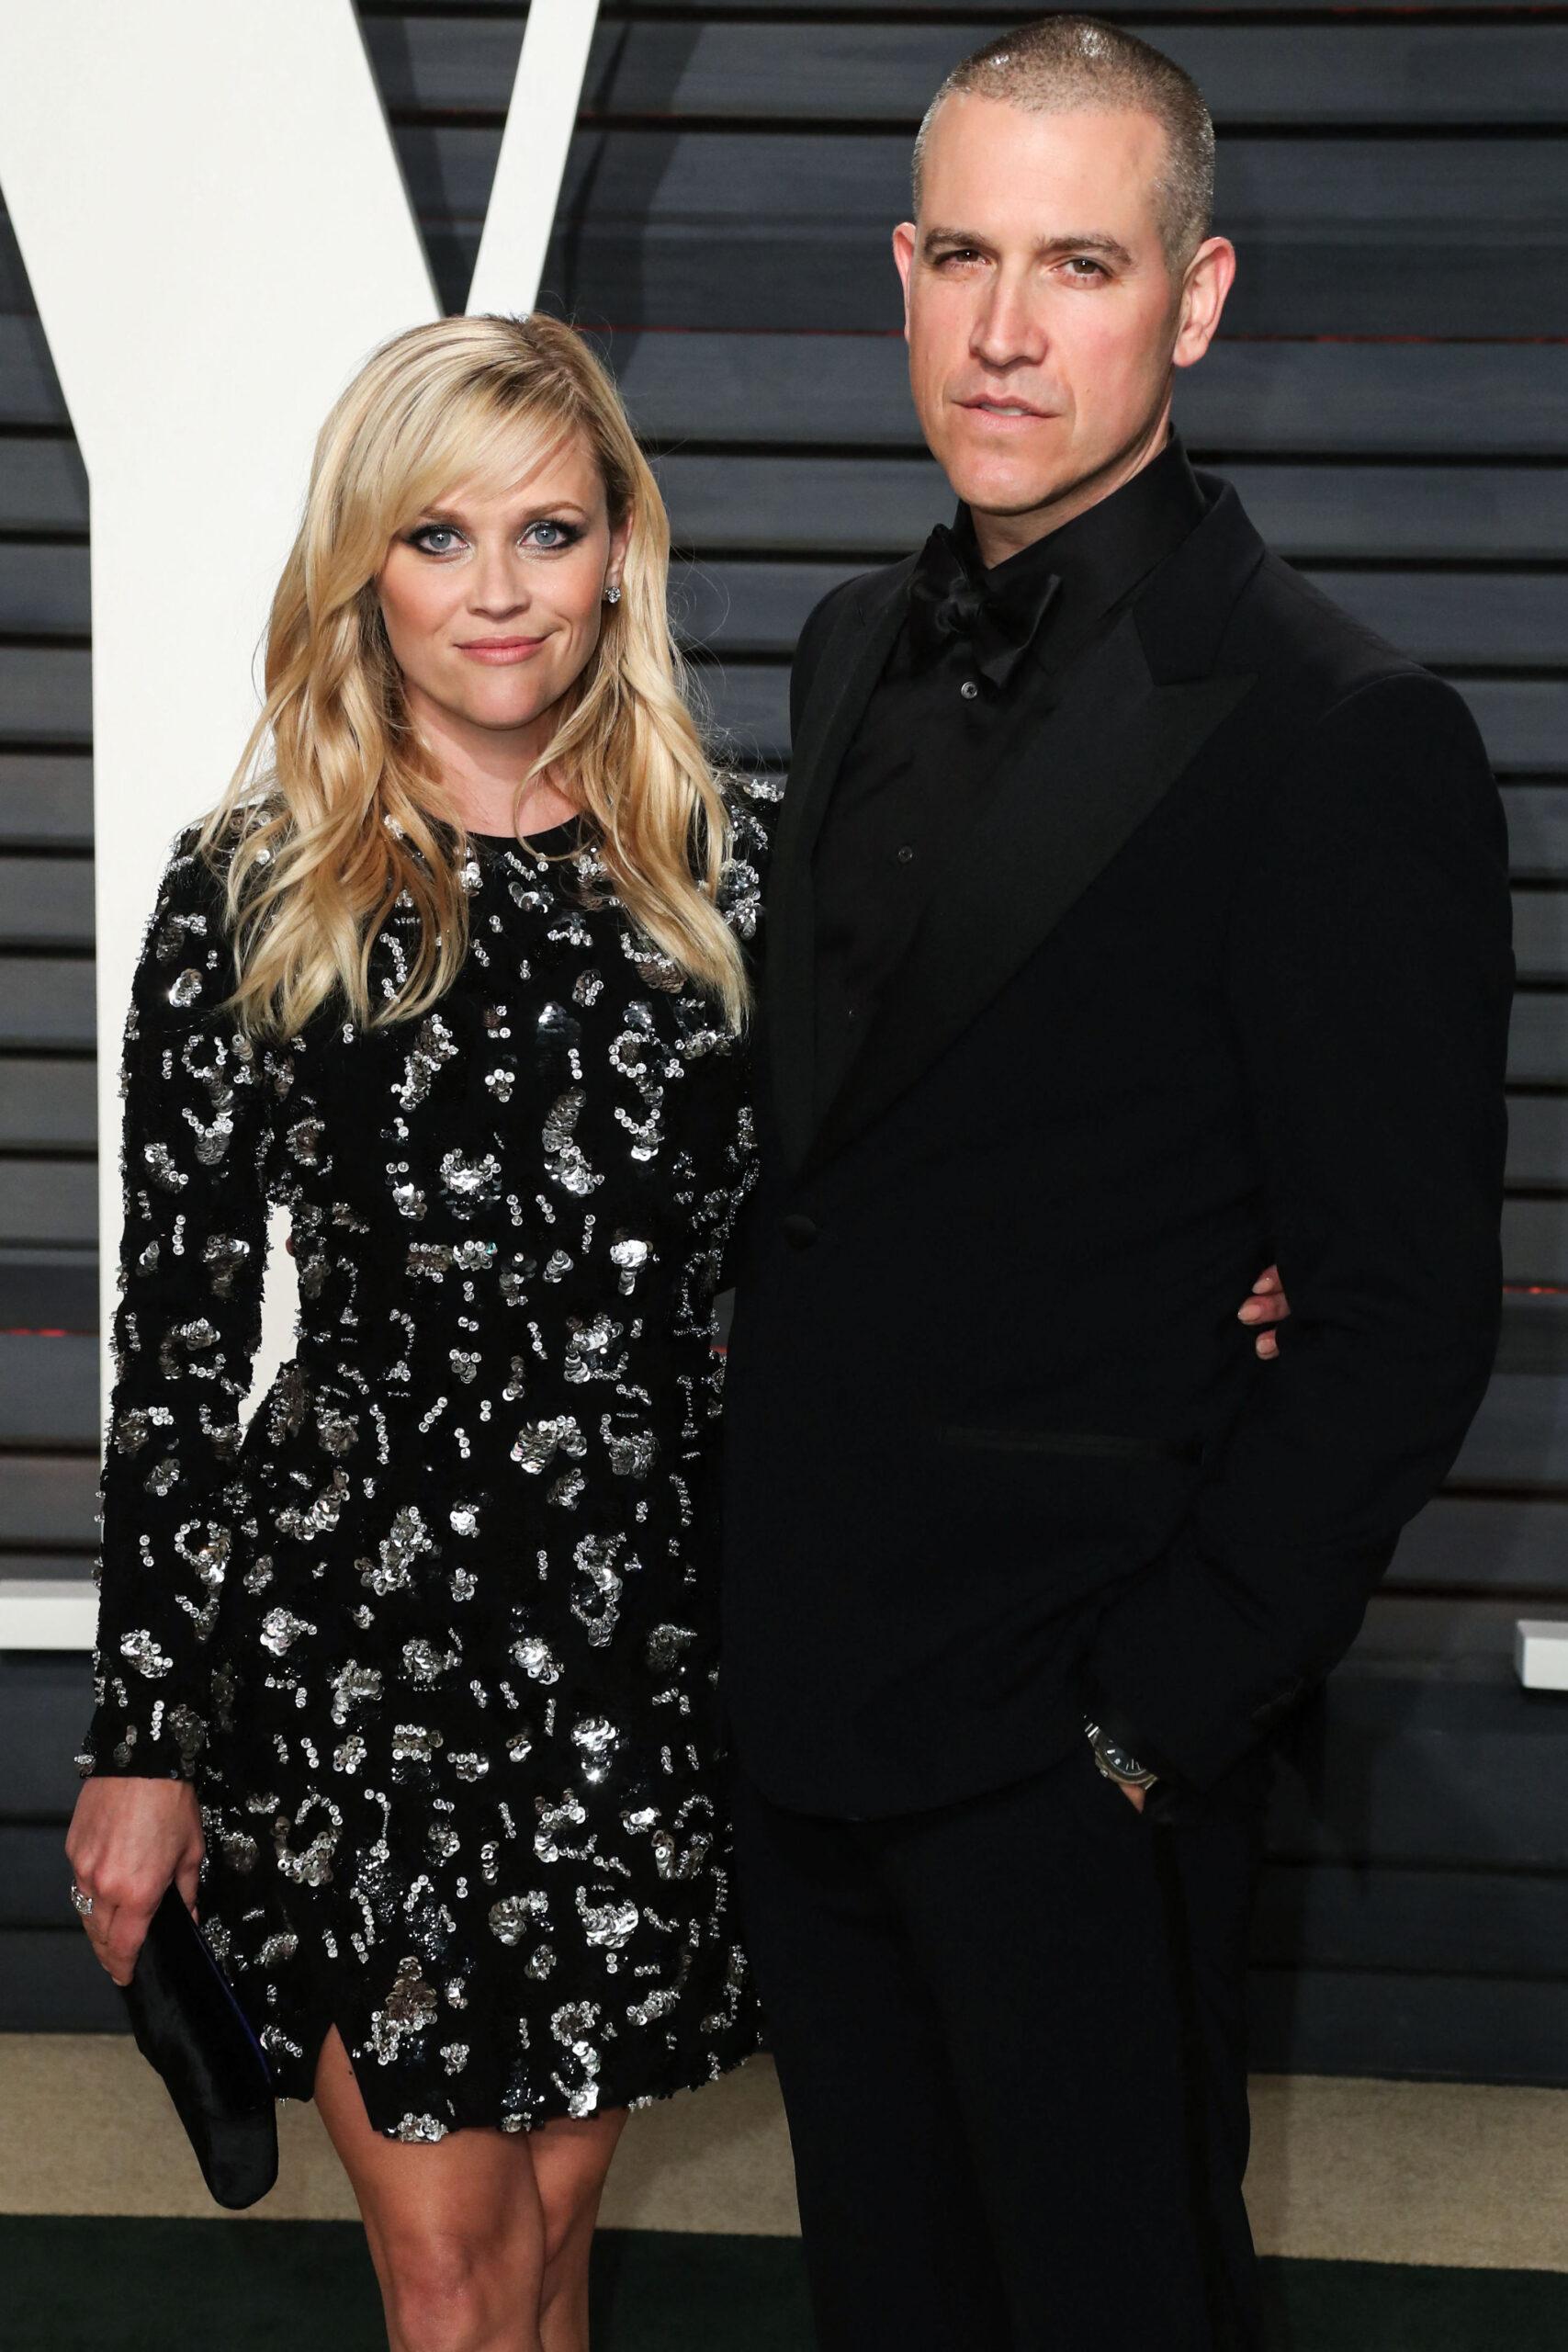 Reese Witherspoon and Jim Toth at the 2017 Vanity Fair Oscar Party